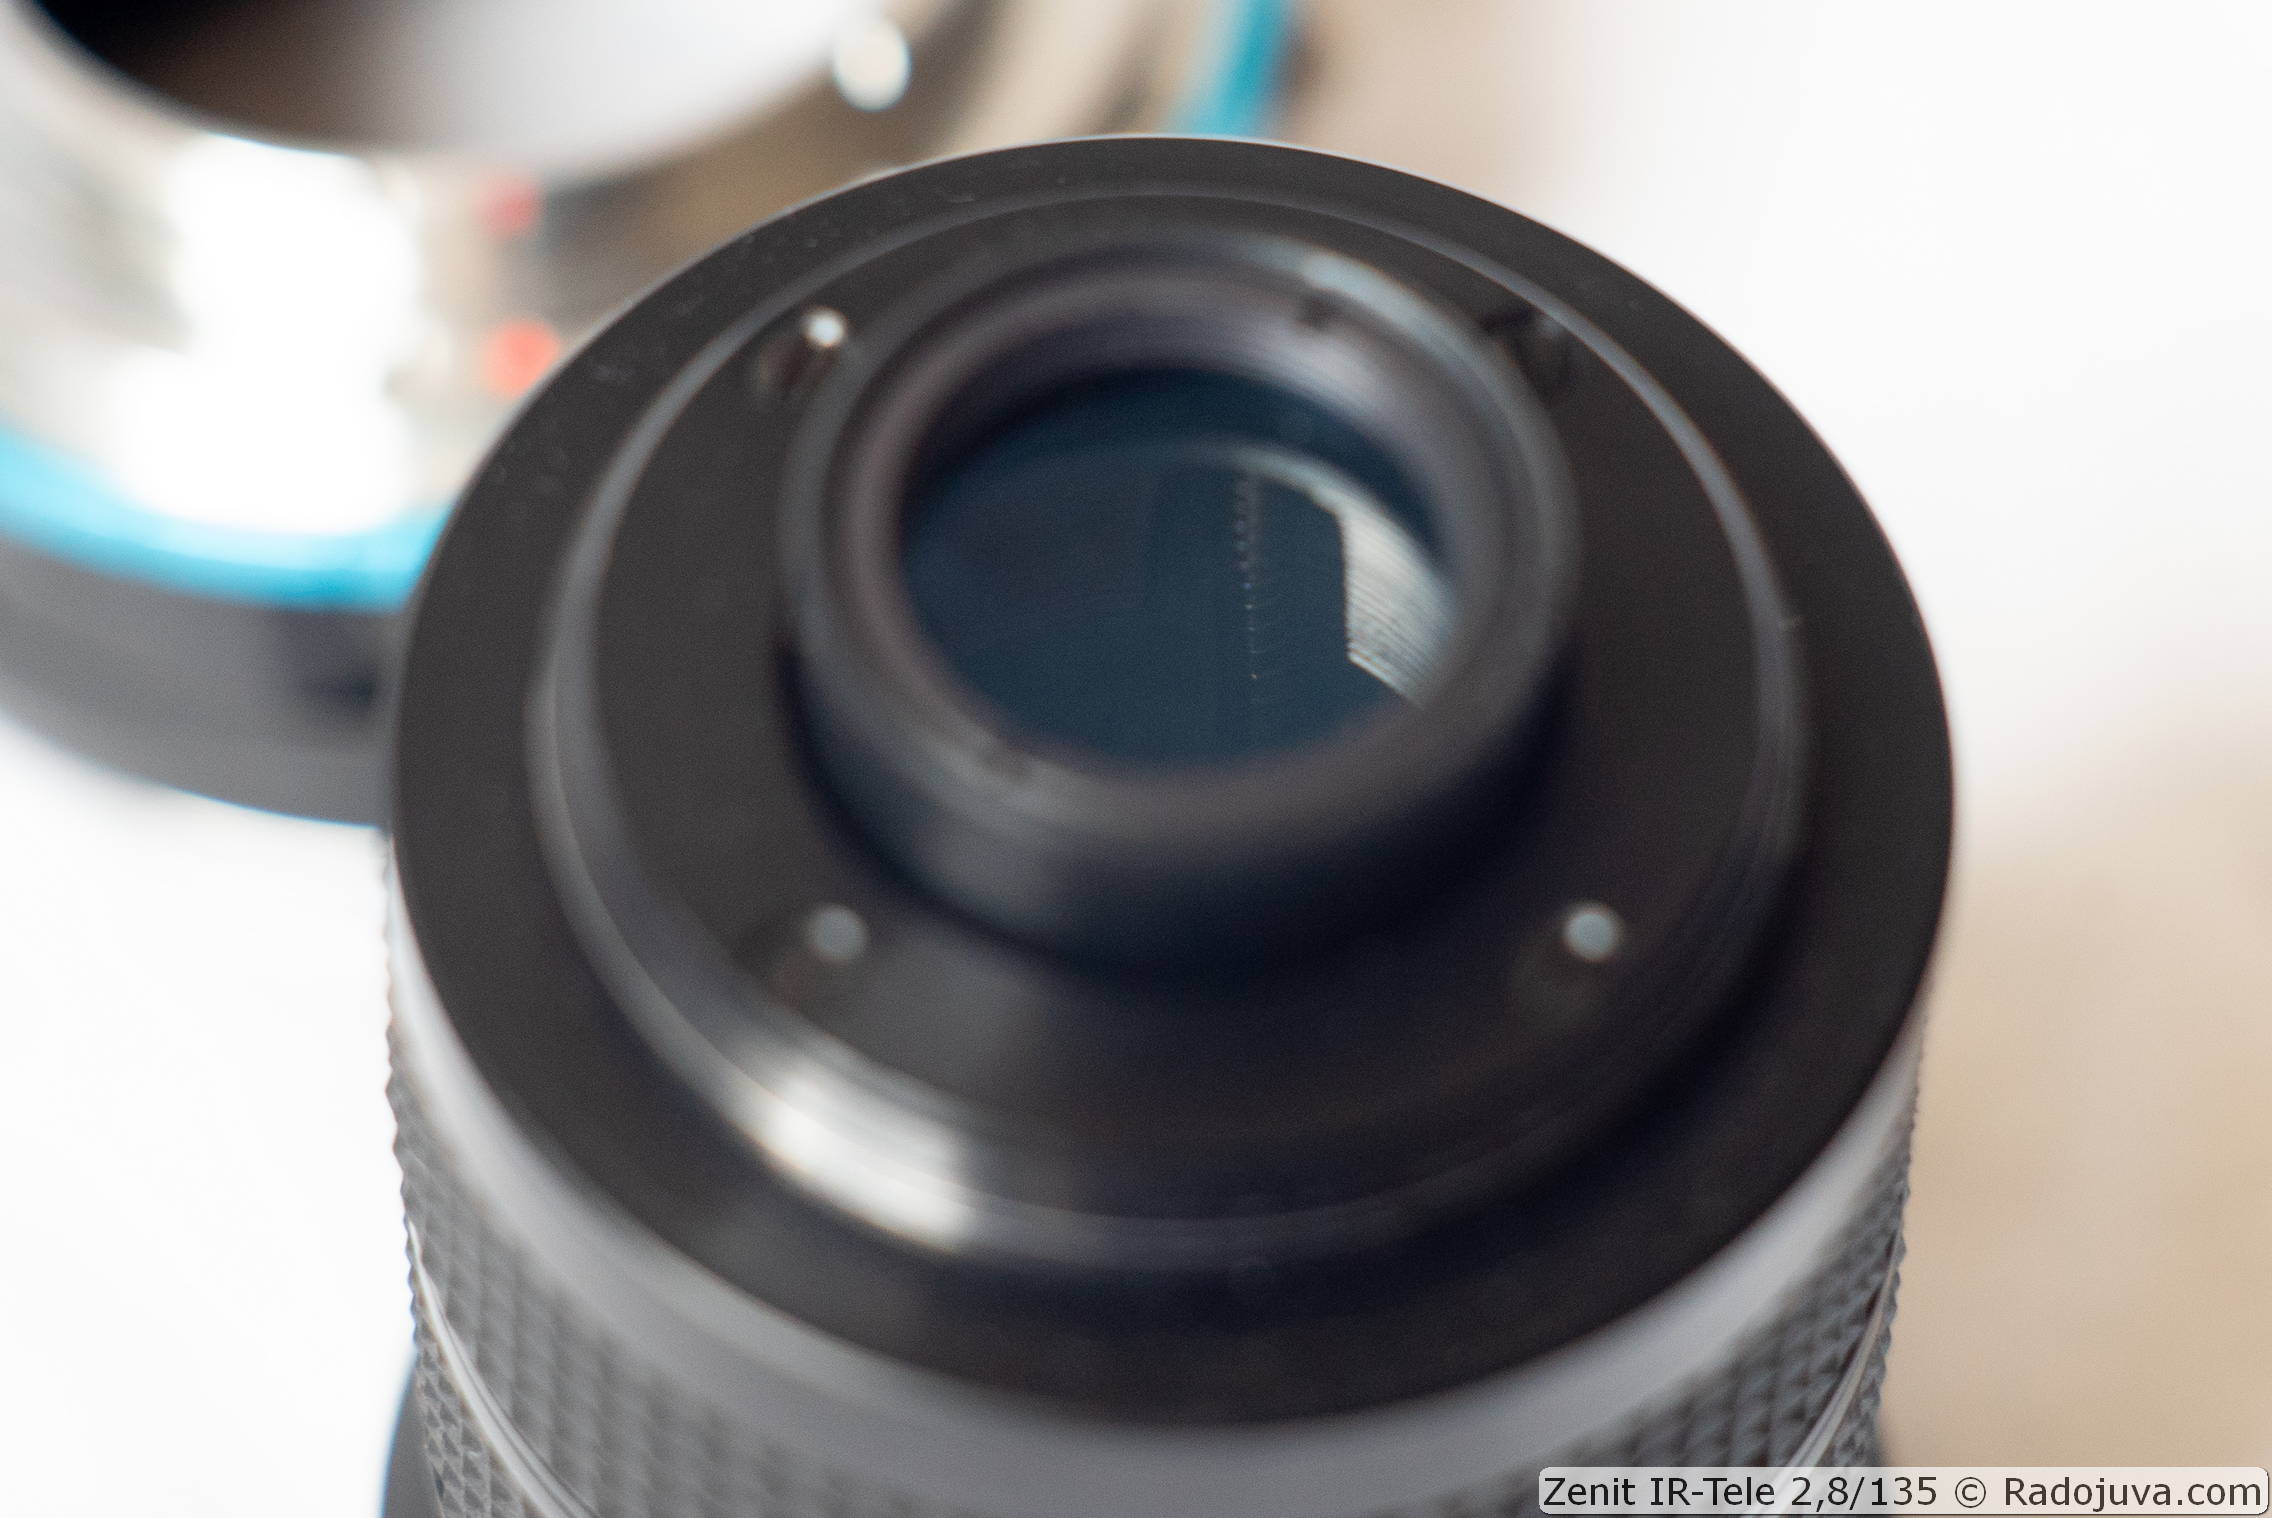 View of the lens from the side of the rear lens when focusing at infinity.